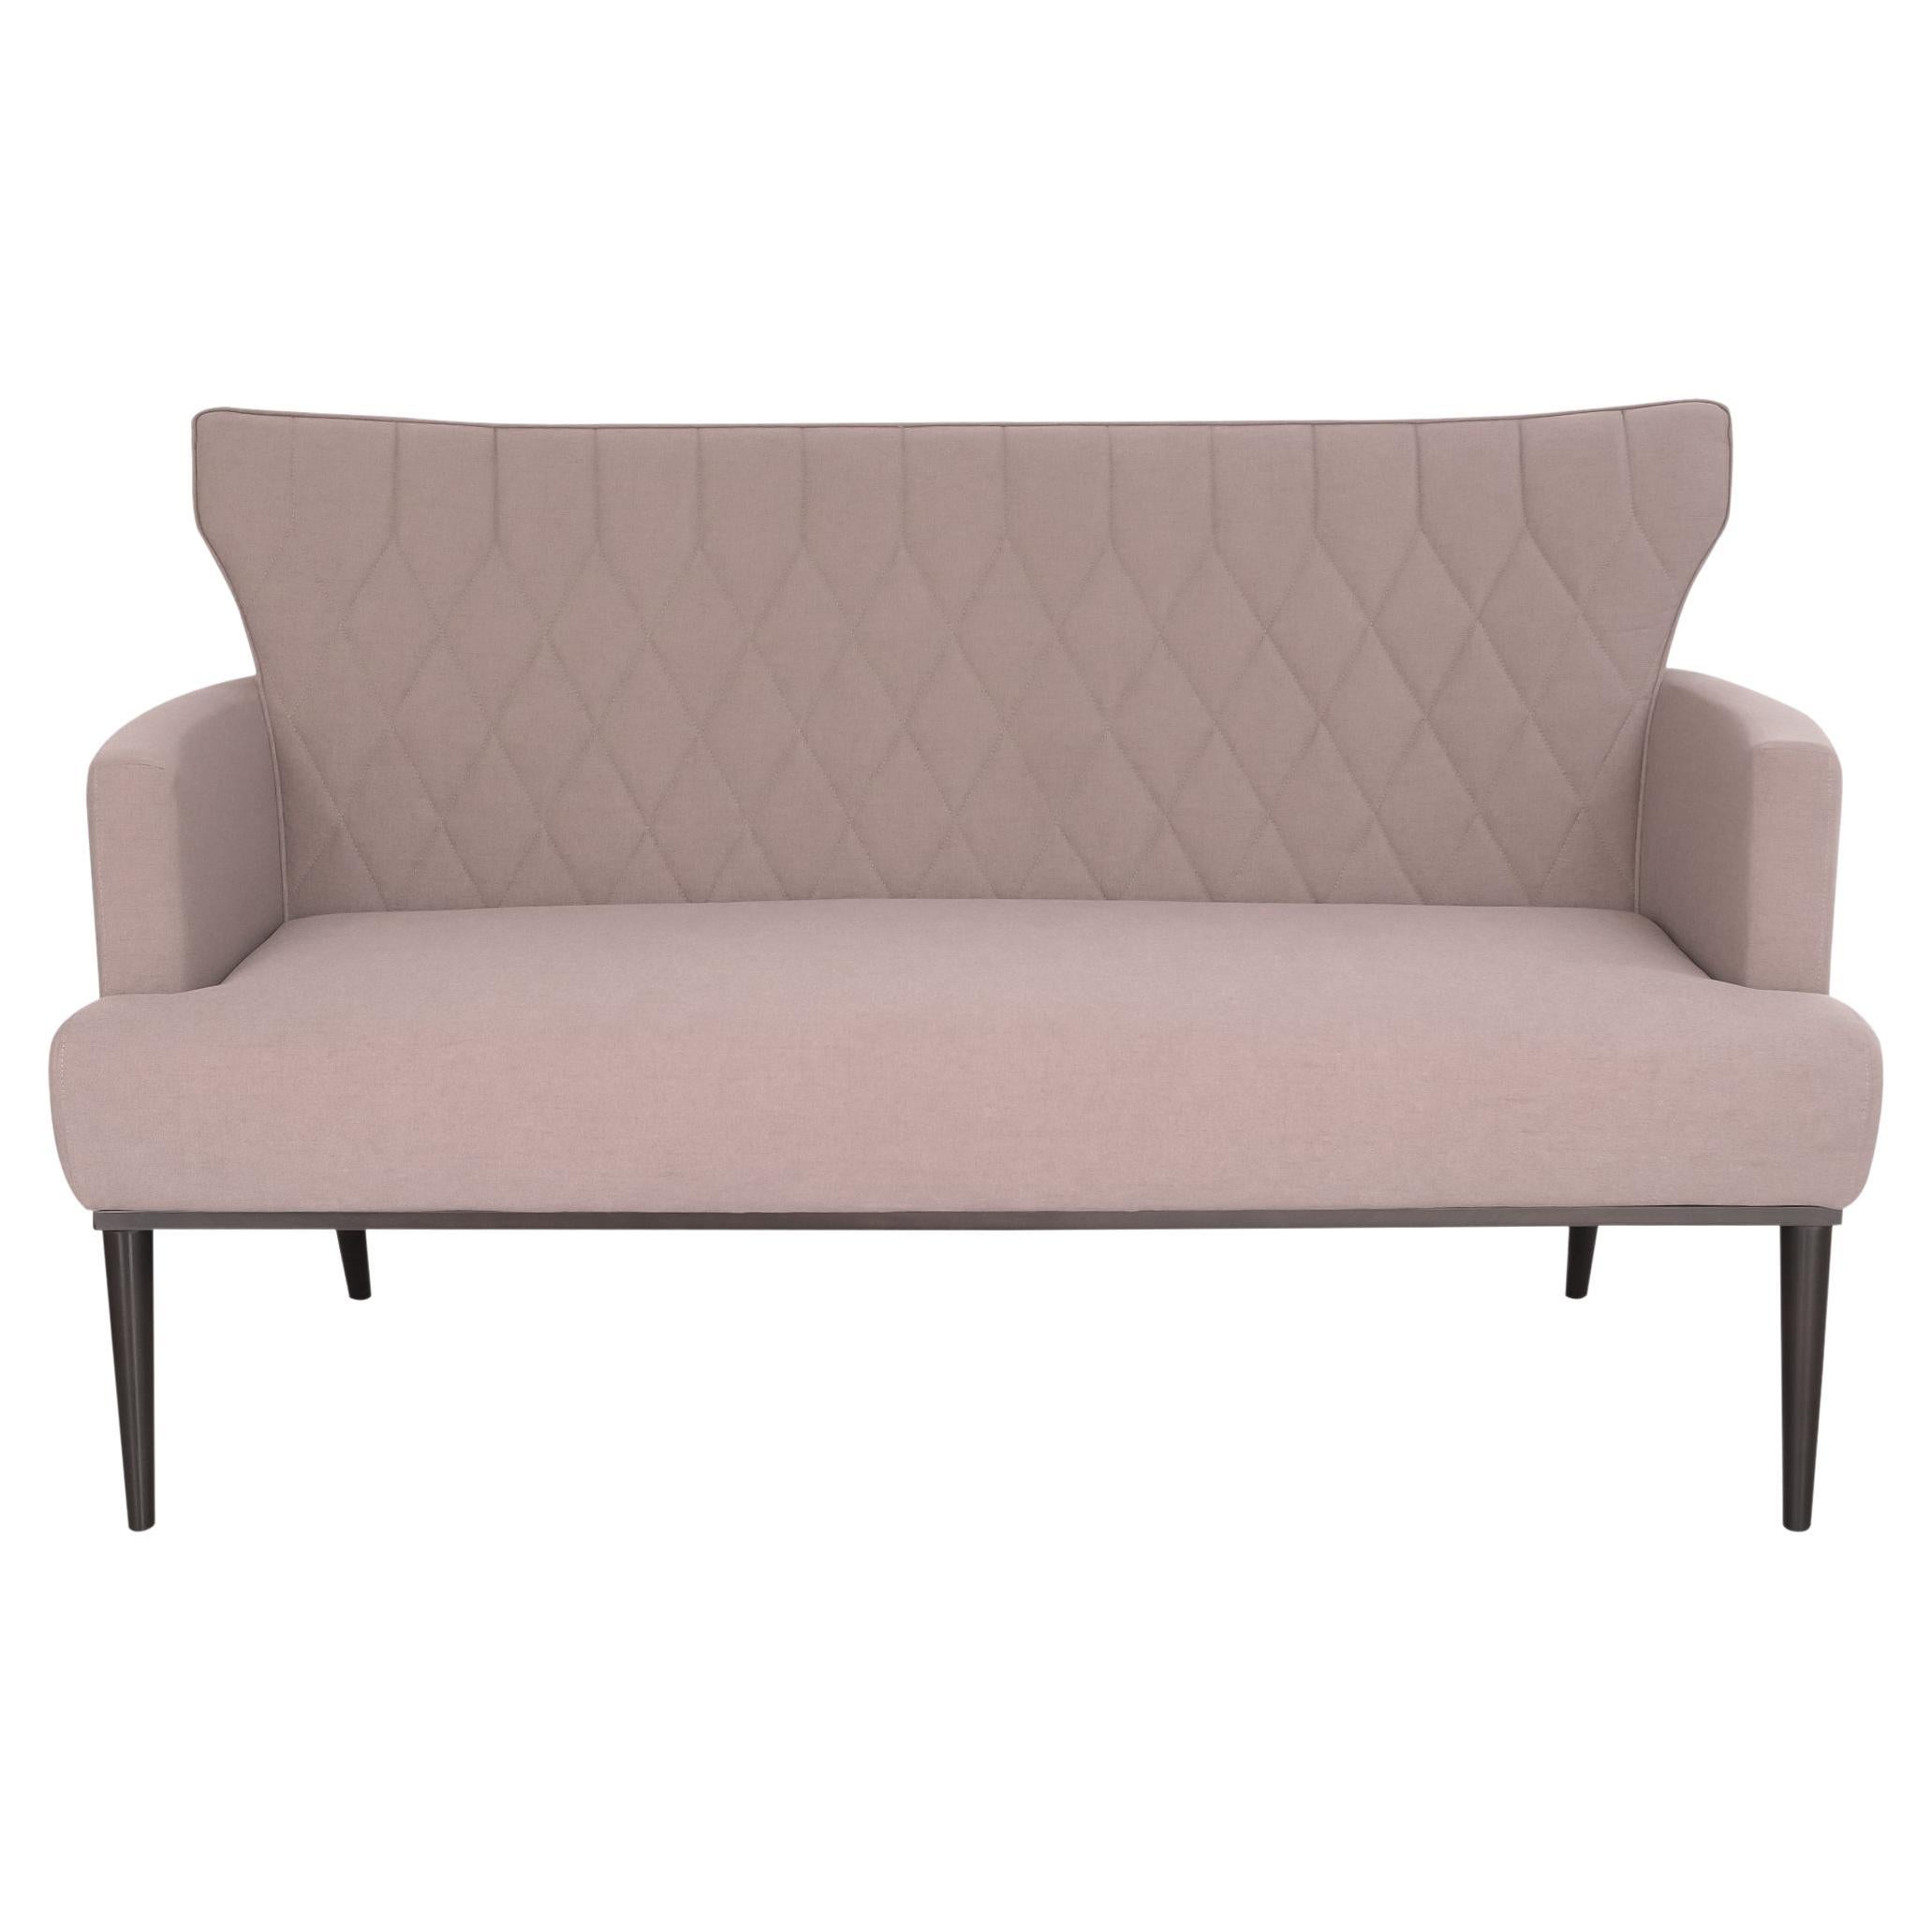 Sofa 2 seater with stitching detail on backrest For Sale